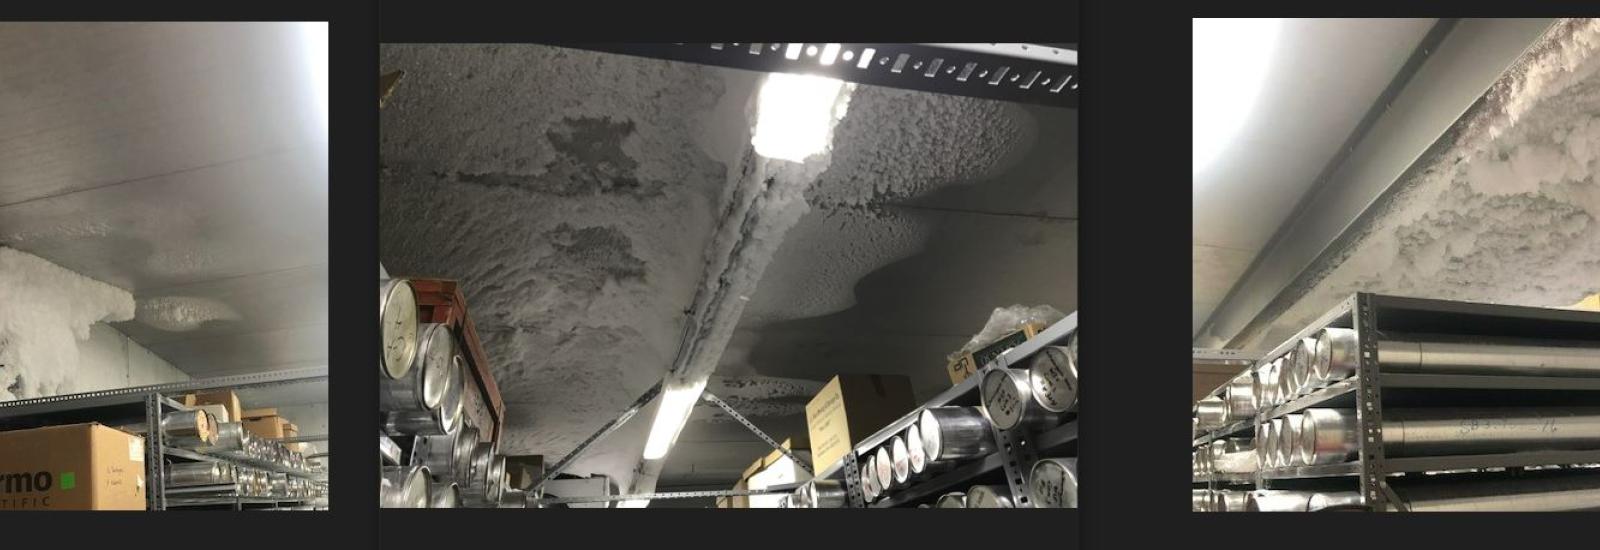 collection of 3 images of the ice core facility side by side from left to rights showing frost build up  on left wall above silver metal shelving housing silver cylinders and cardboard boxes, middle image showing buildup on ceiling above metal shelving housing silver cylinders and cardboard boxes and third image to the right shows frost buildup to the right above silver metal shelving housing silver cylinders and cardboard boxes